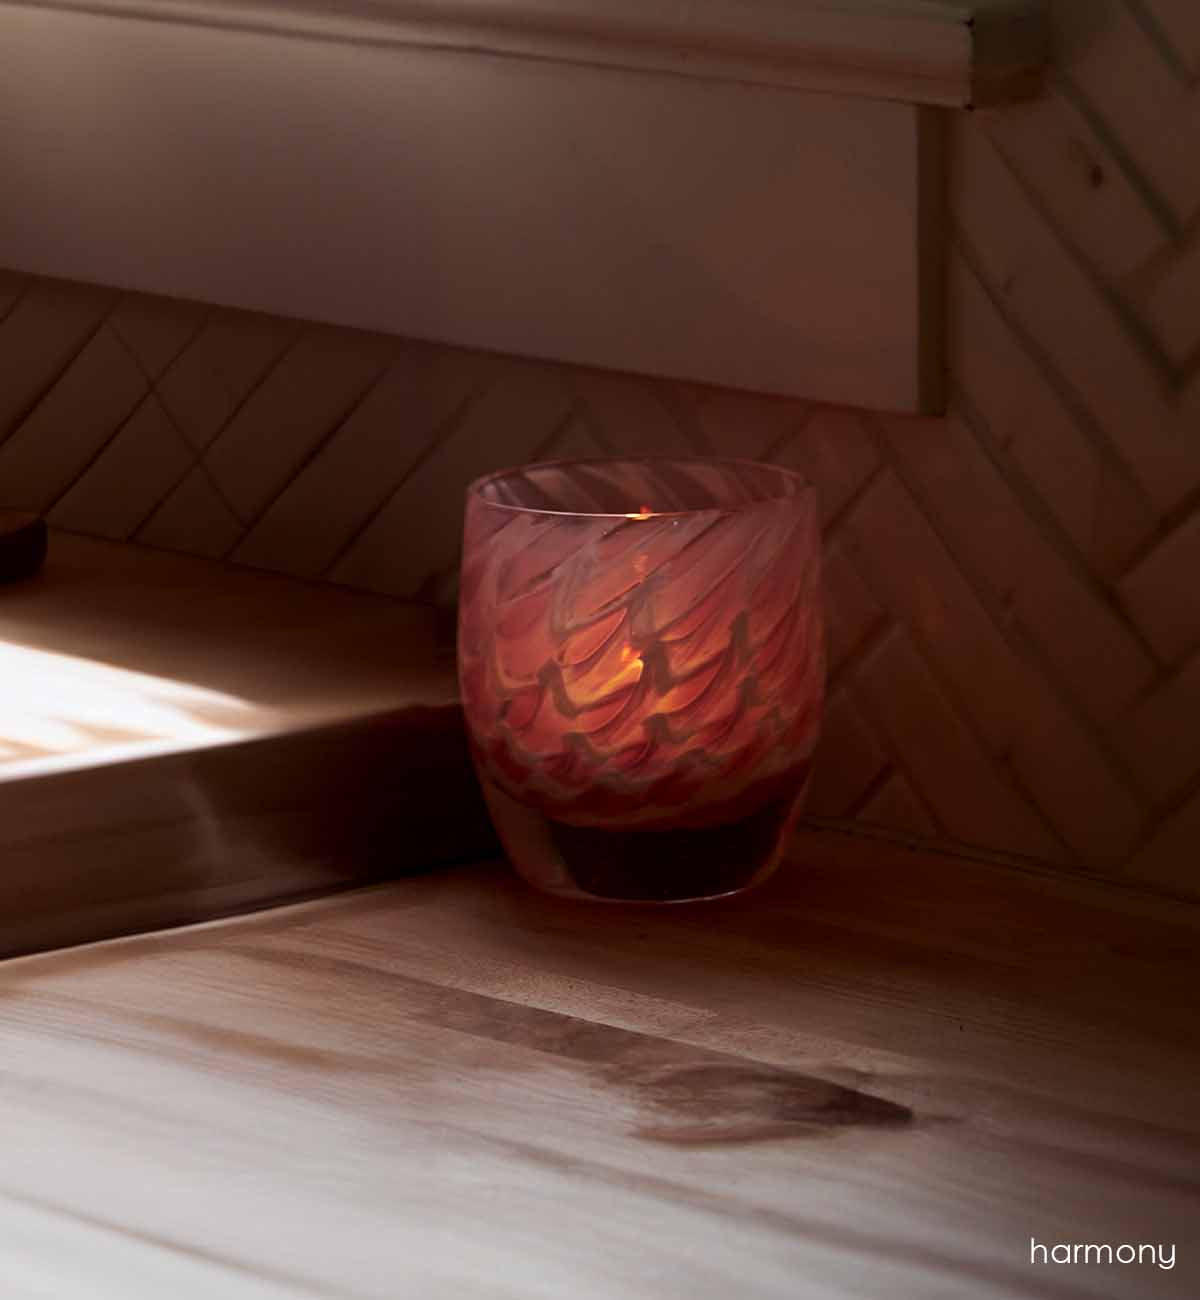 harmony, pink feathered texture hand-blown glass votive candle holder. Glowing a flame on a wooden counter.